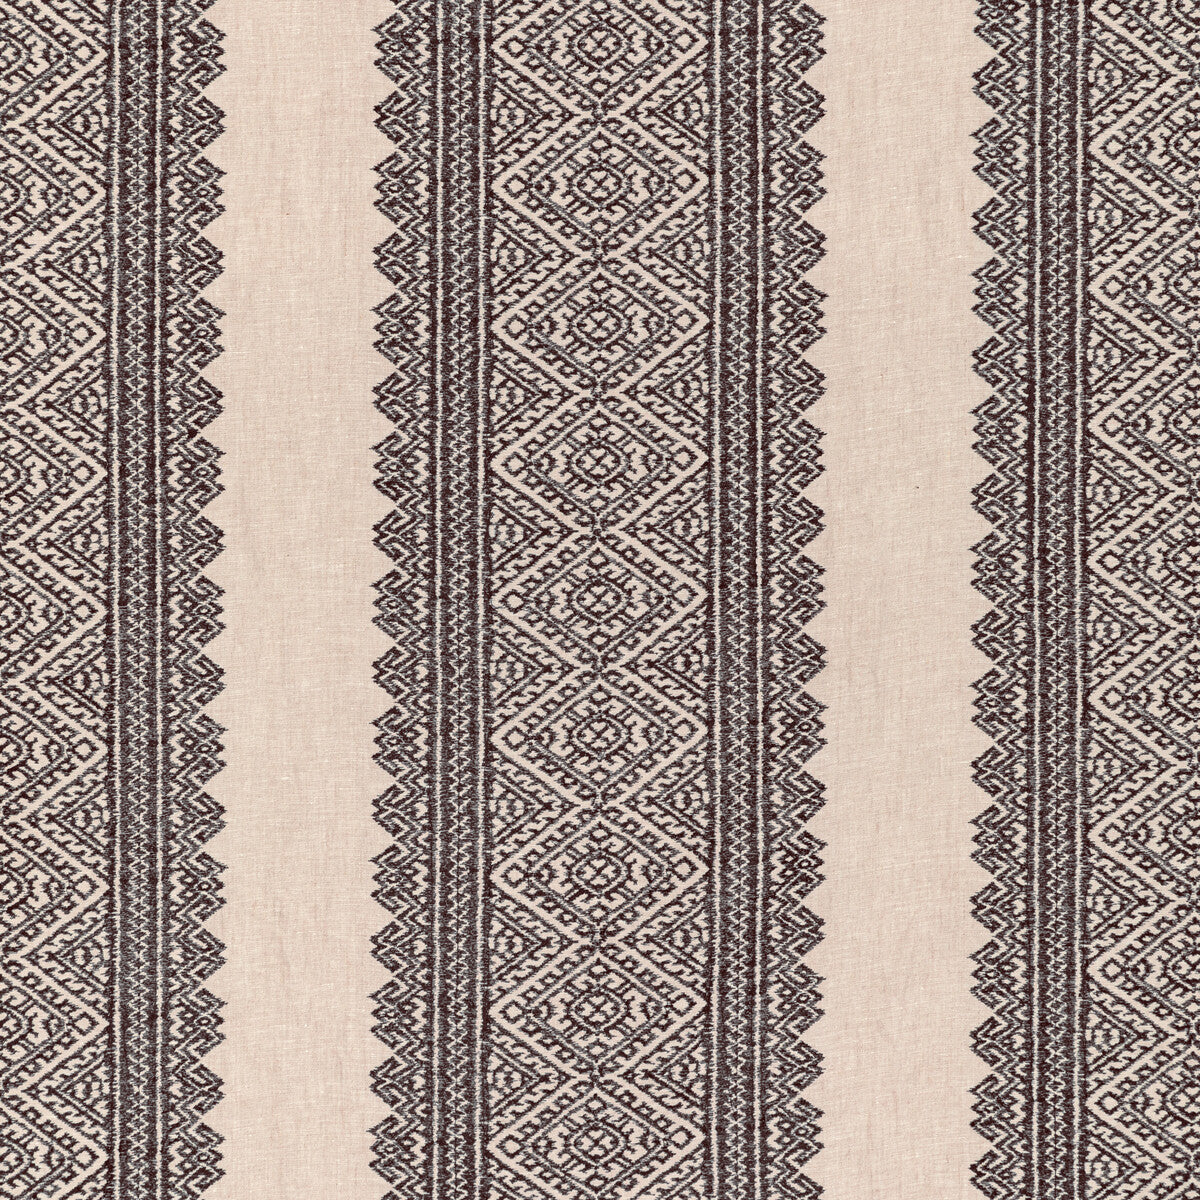 Avon Embroidery fabric in smoke color - pattern 2020211.68.0 - by Lee Jofa in the Breckenridge collection